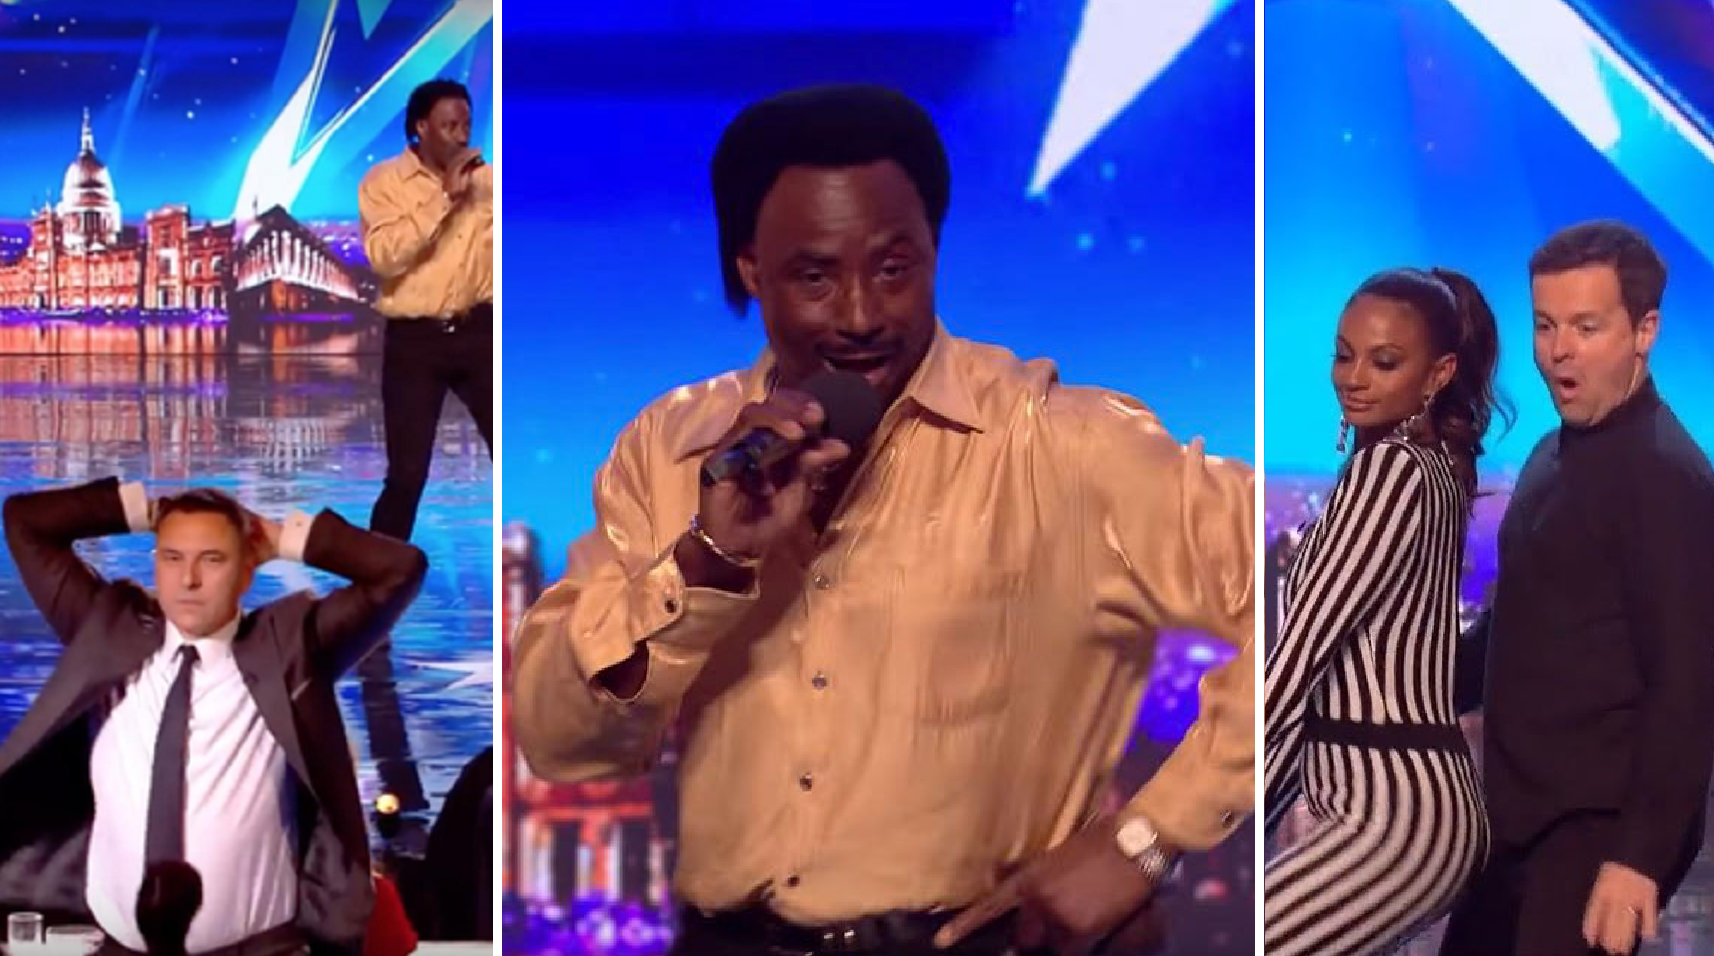 This Man’s Incredible Audition-Performance Had The Entire Audience Dancing, Getting Him a ‘Golden Buzzer’